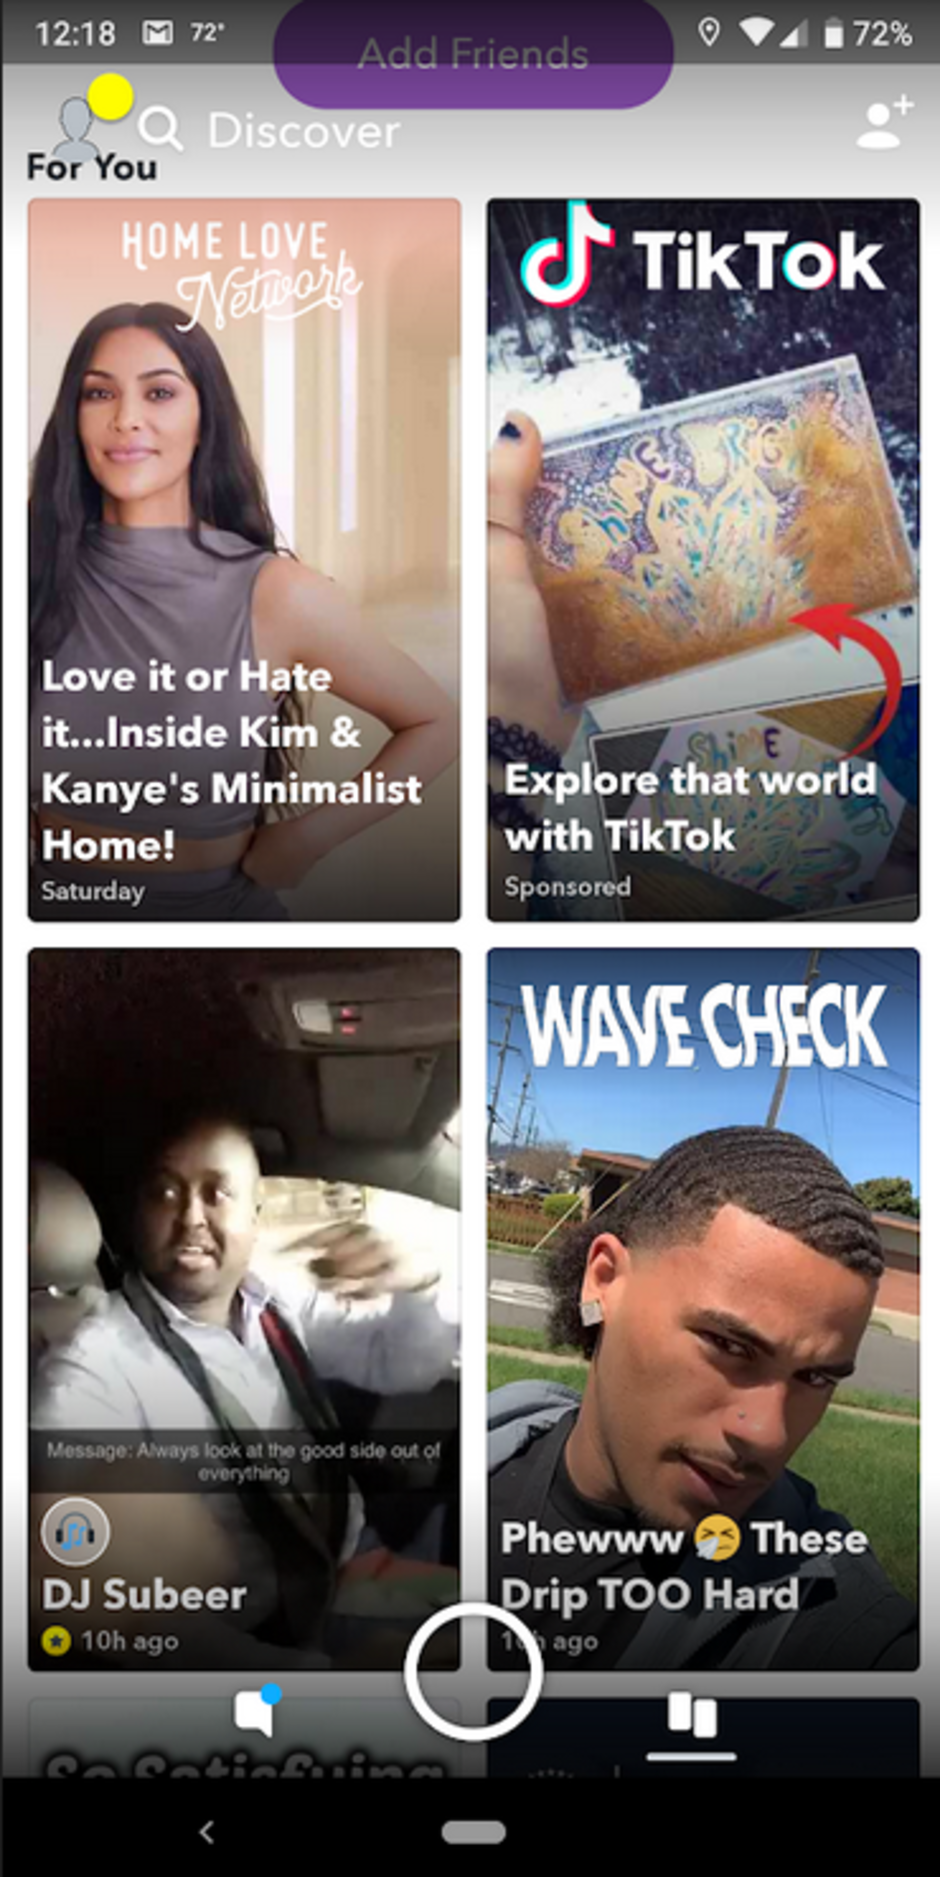 The Discover feature on Snapchat shows content from celebrities and Snap's media partners - Snapchat's rebuilt Android app has better performance and improves your favorite features